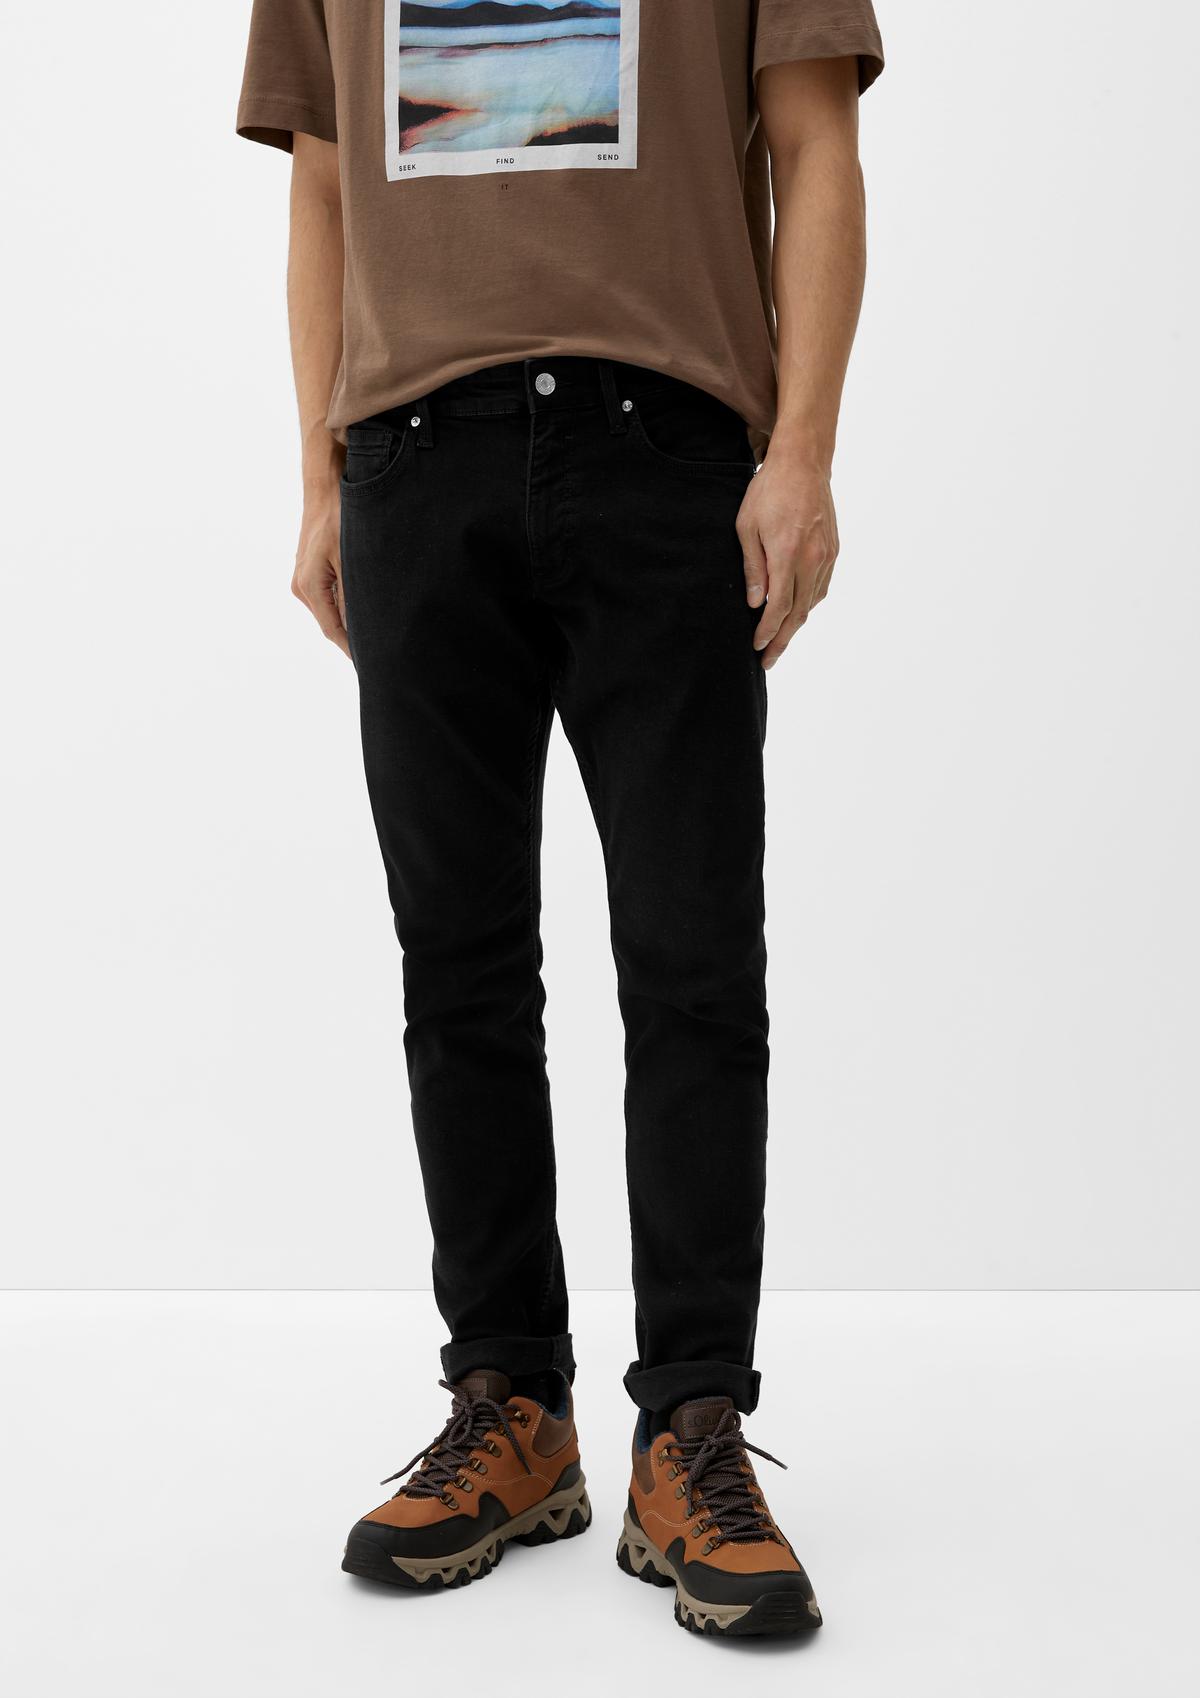 5-pocket - in fit: Slim a jeans stone style